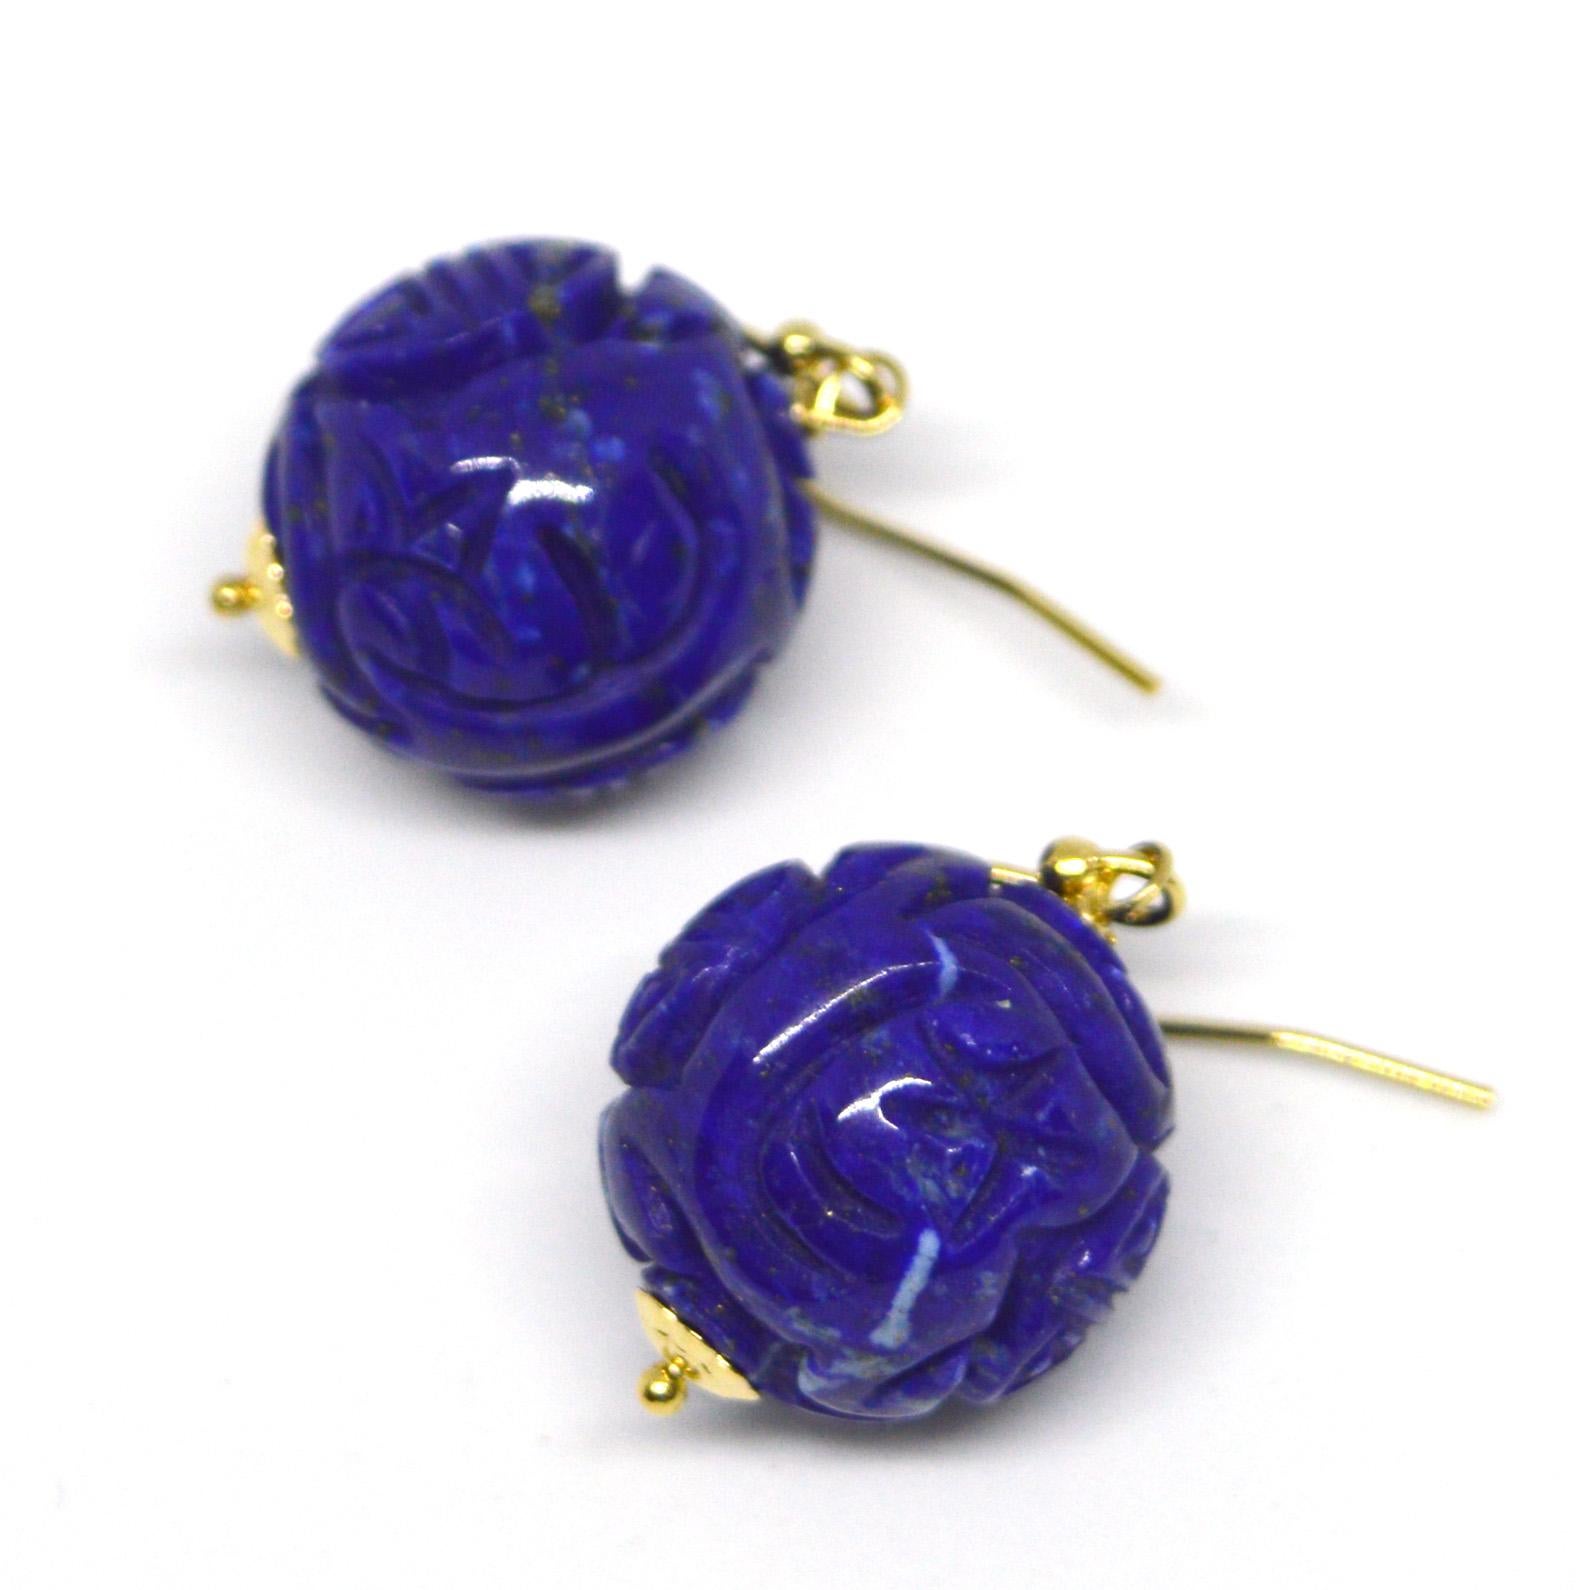 High Quality large natural 18mm carved Lapis Lazuli with a 14k Gold Filled Headpin, cap and Sheppard.

Total Earring length 33mm.